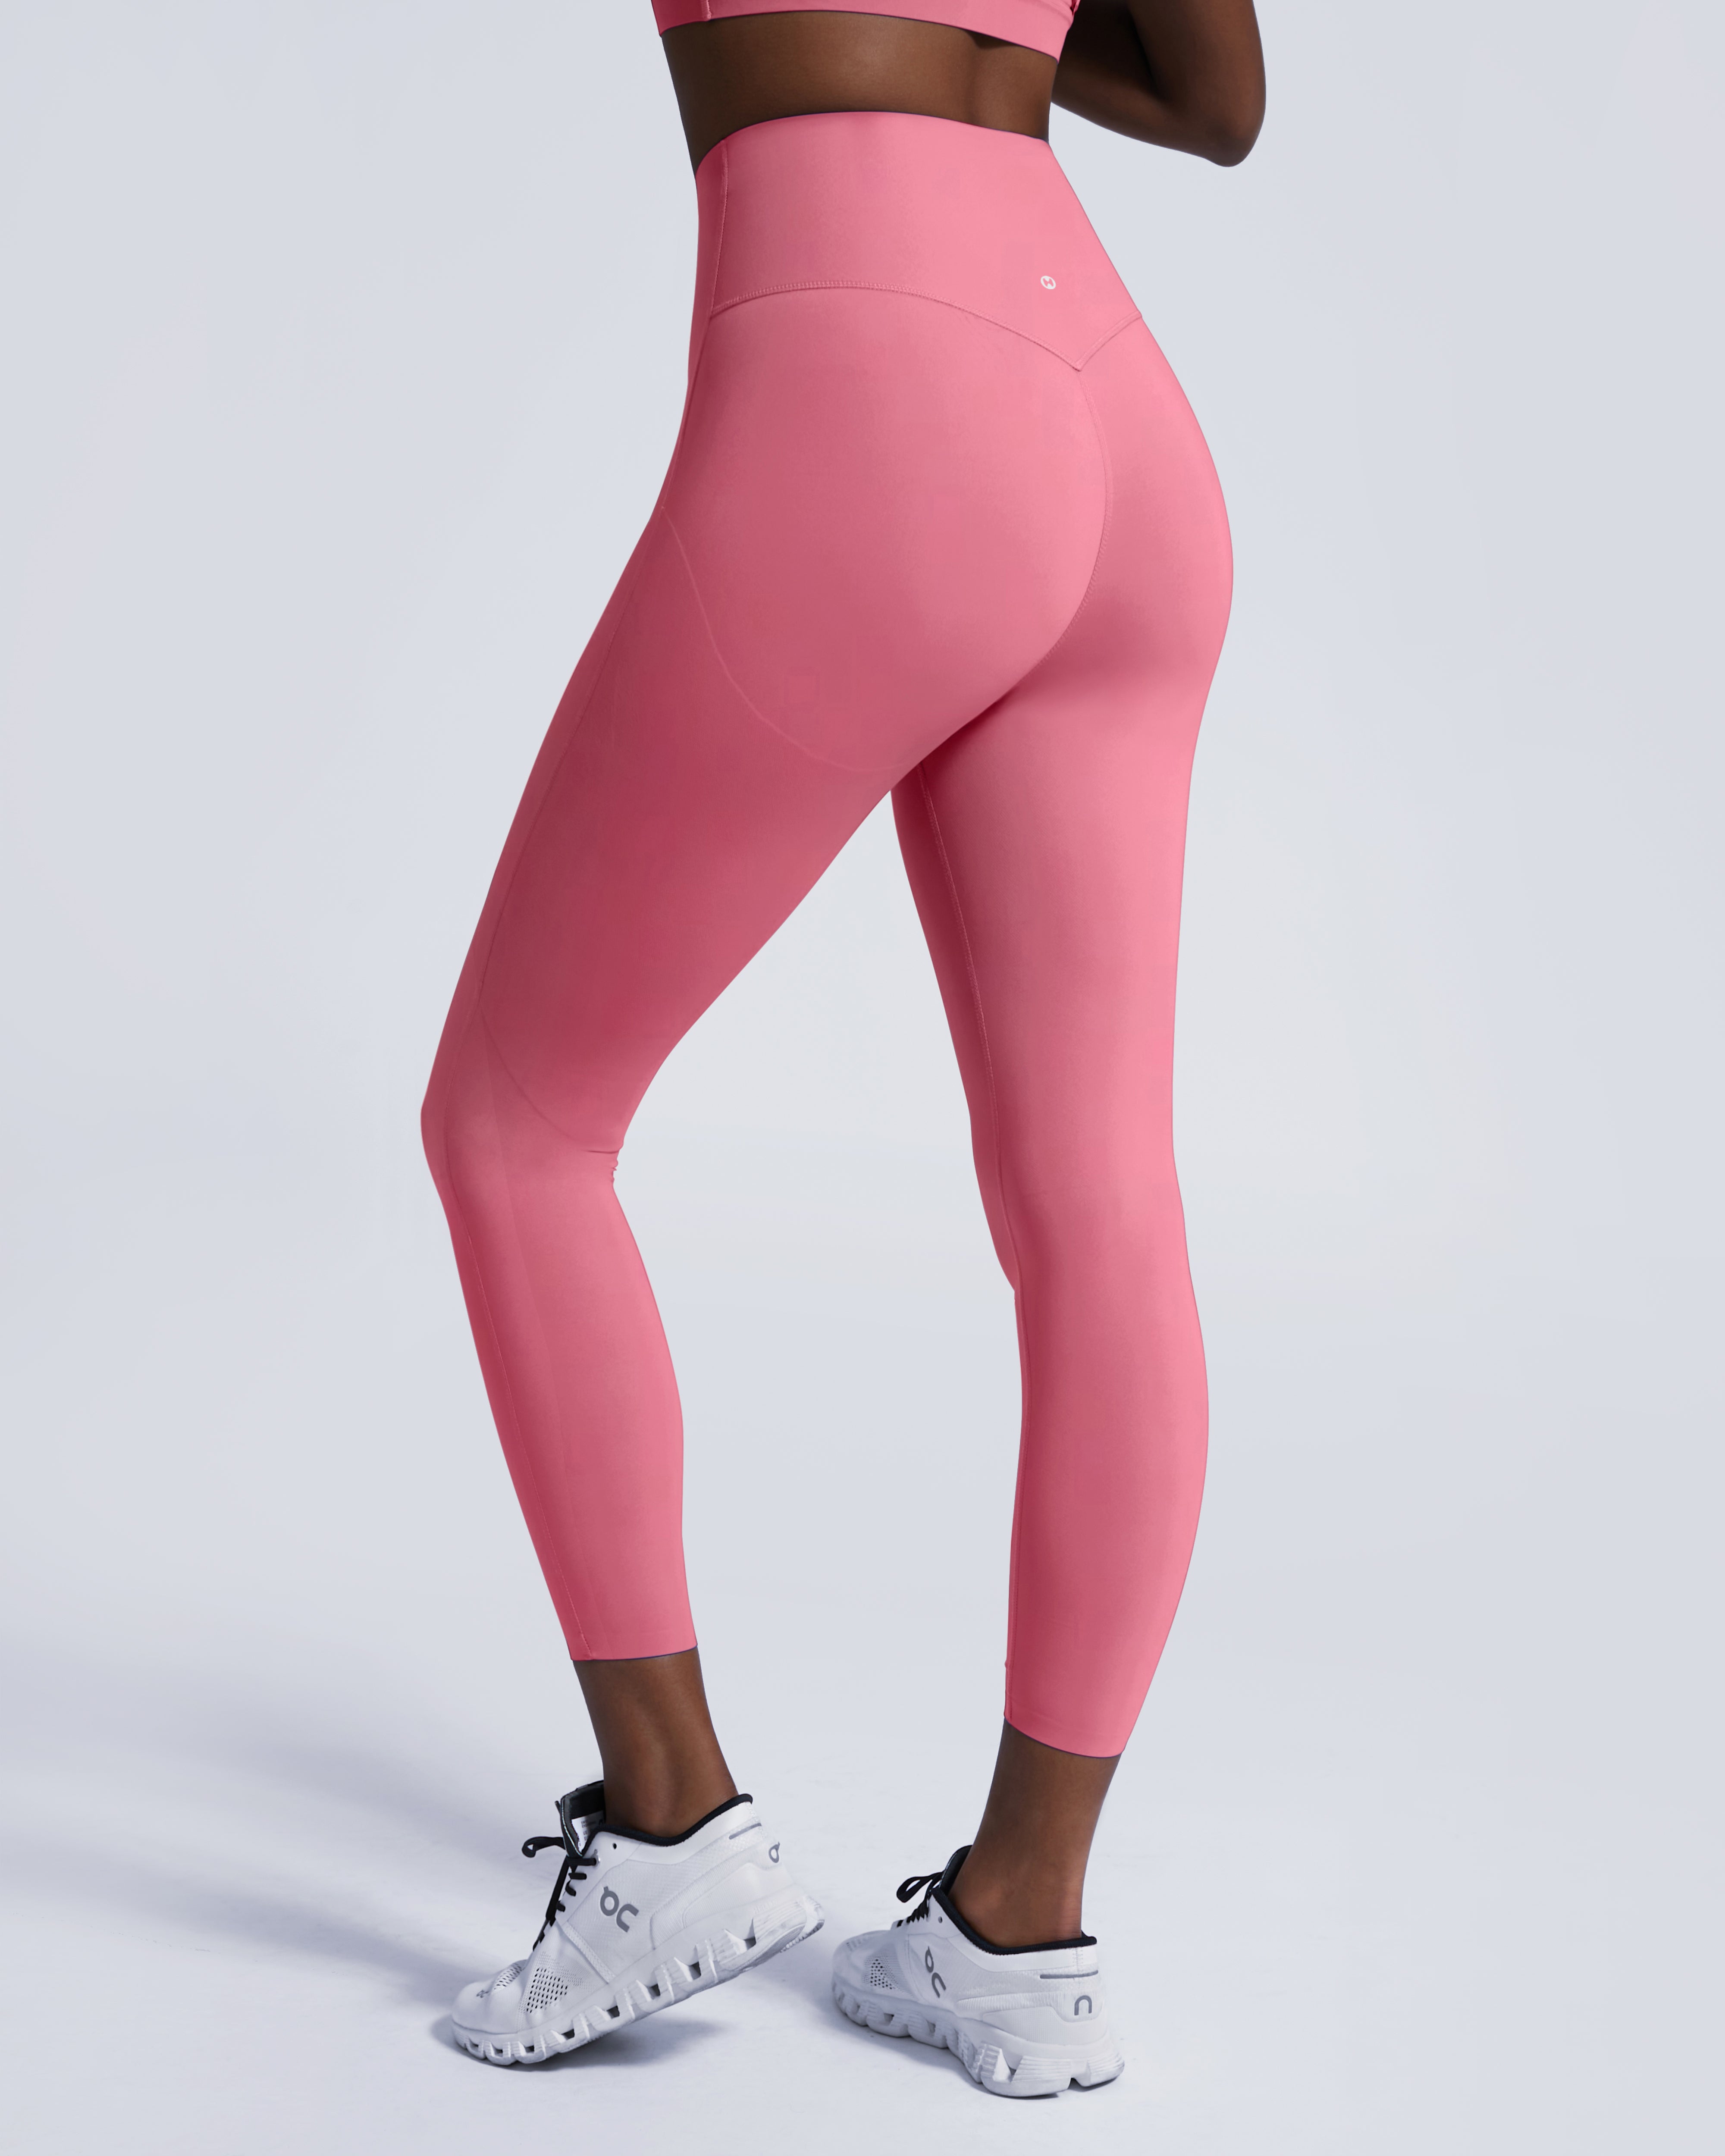 Women's Cardio Fitness High-Waisted Shaping Leggings - Pink